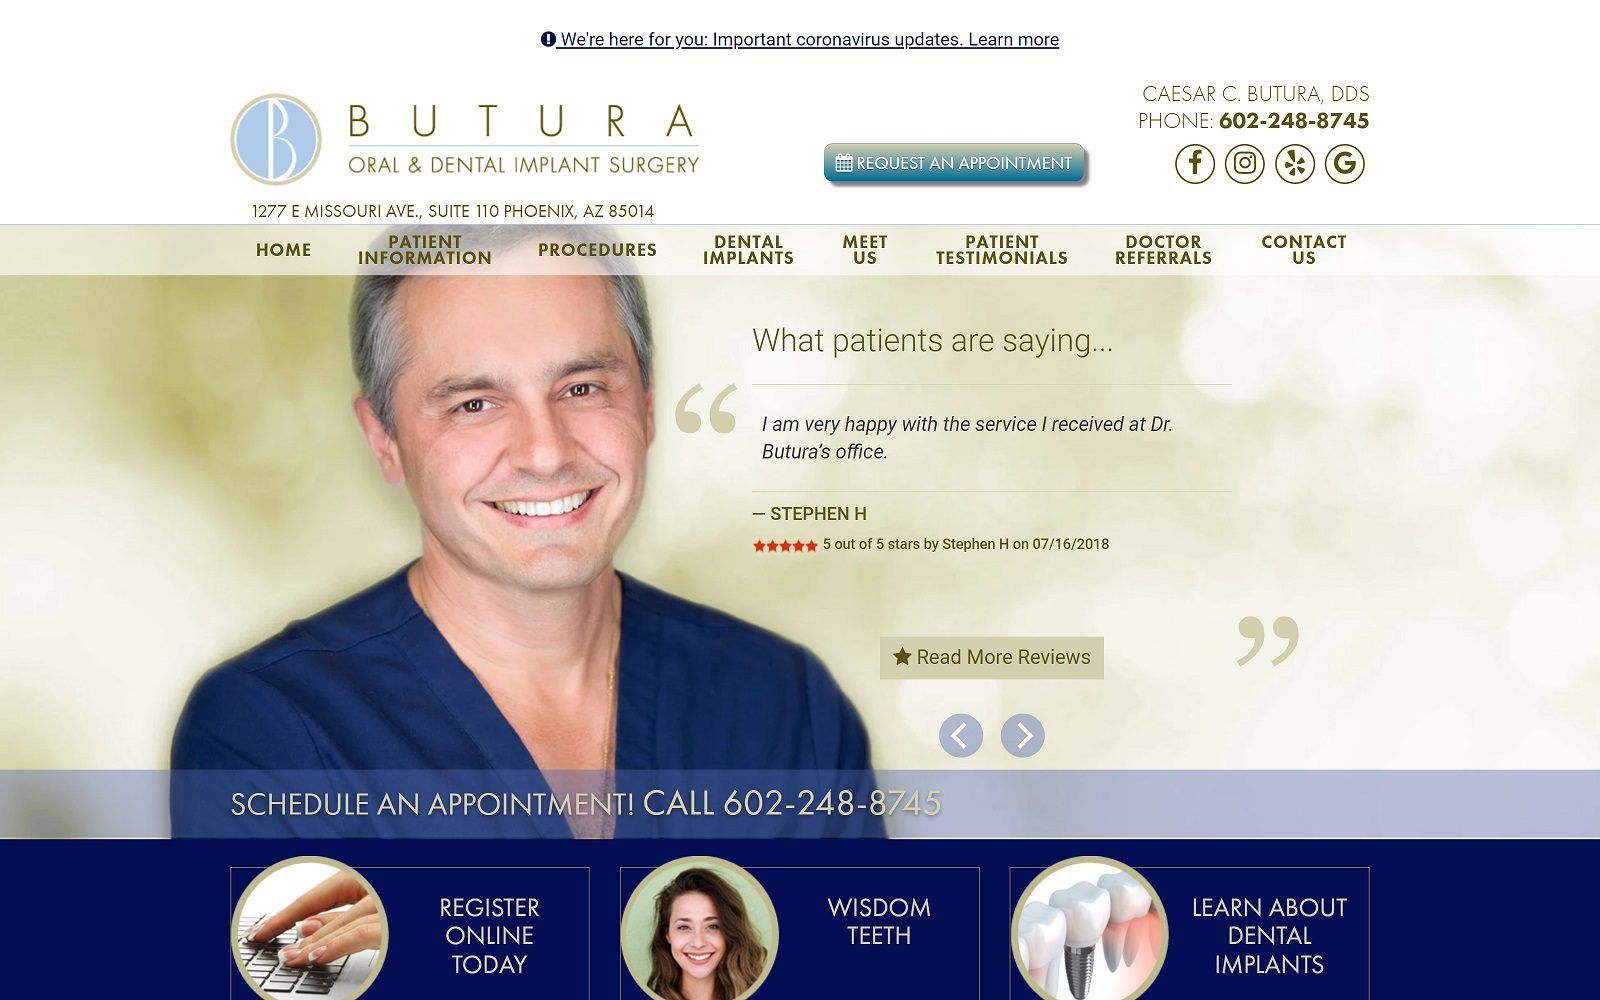 The screenshot of butura oral & dental implant surgery website